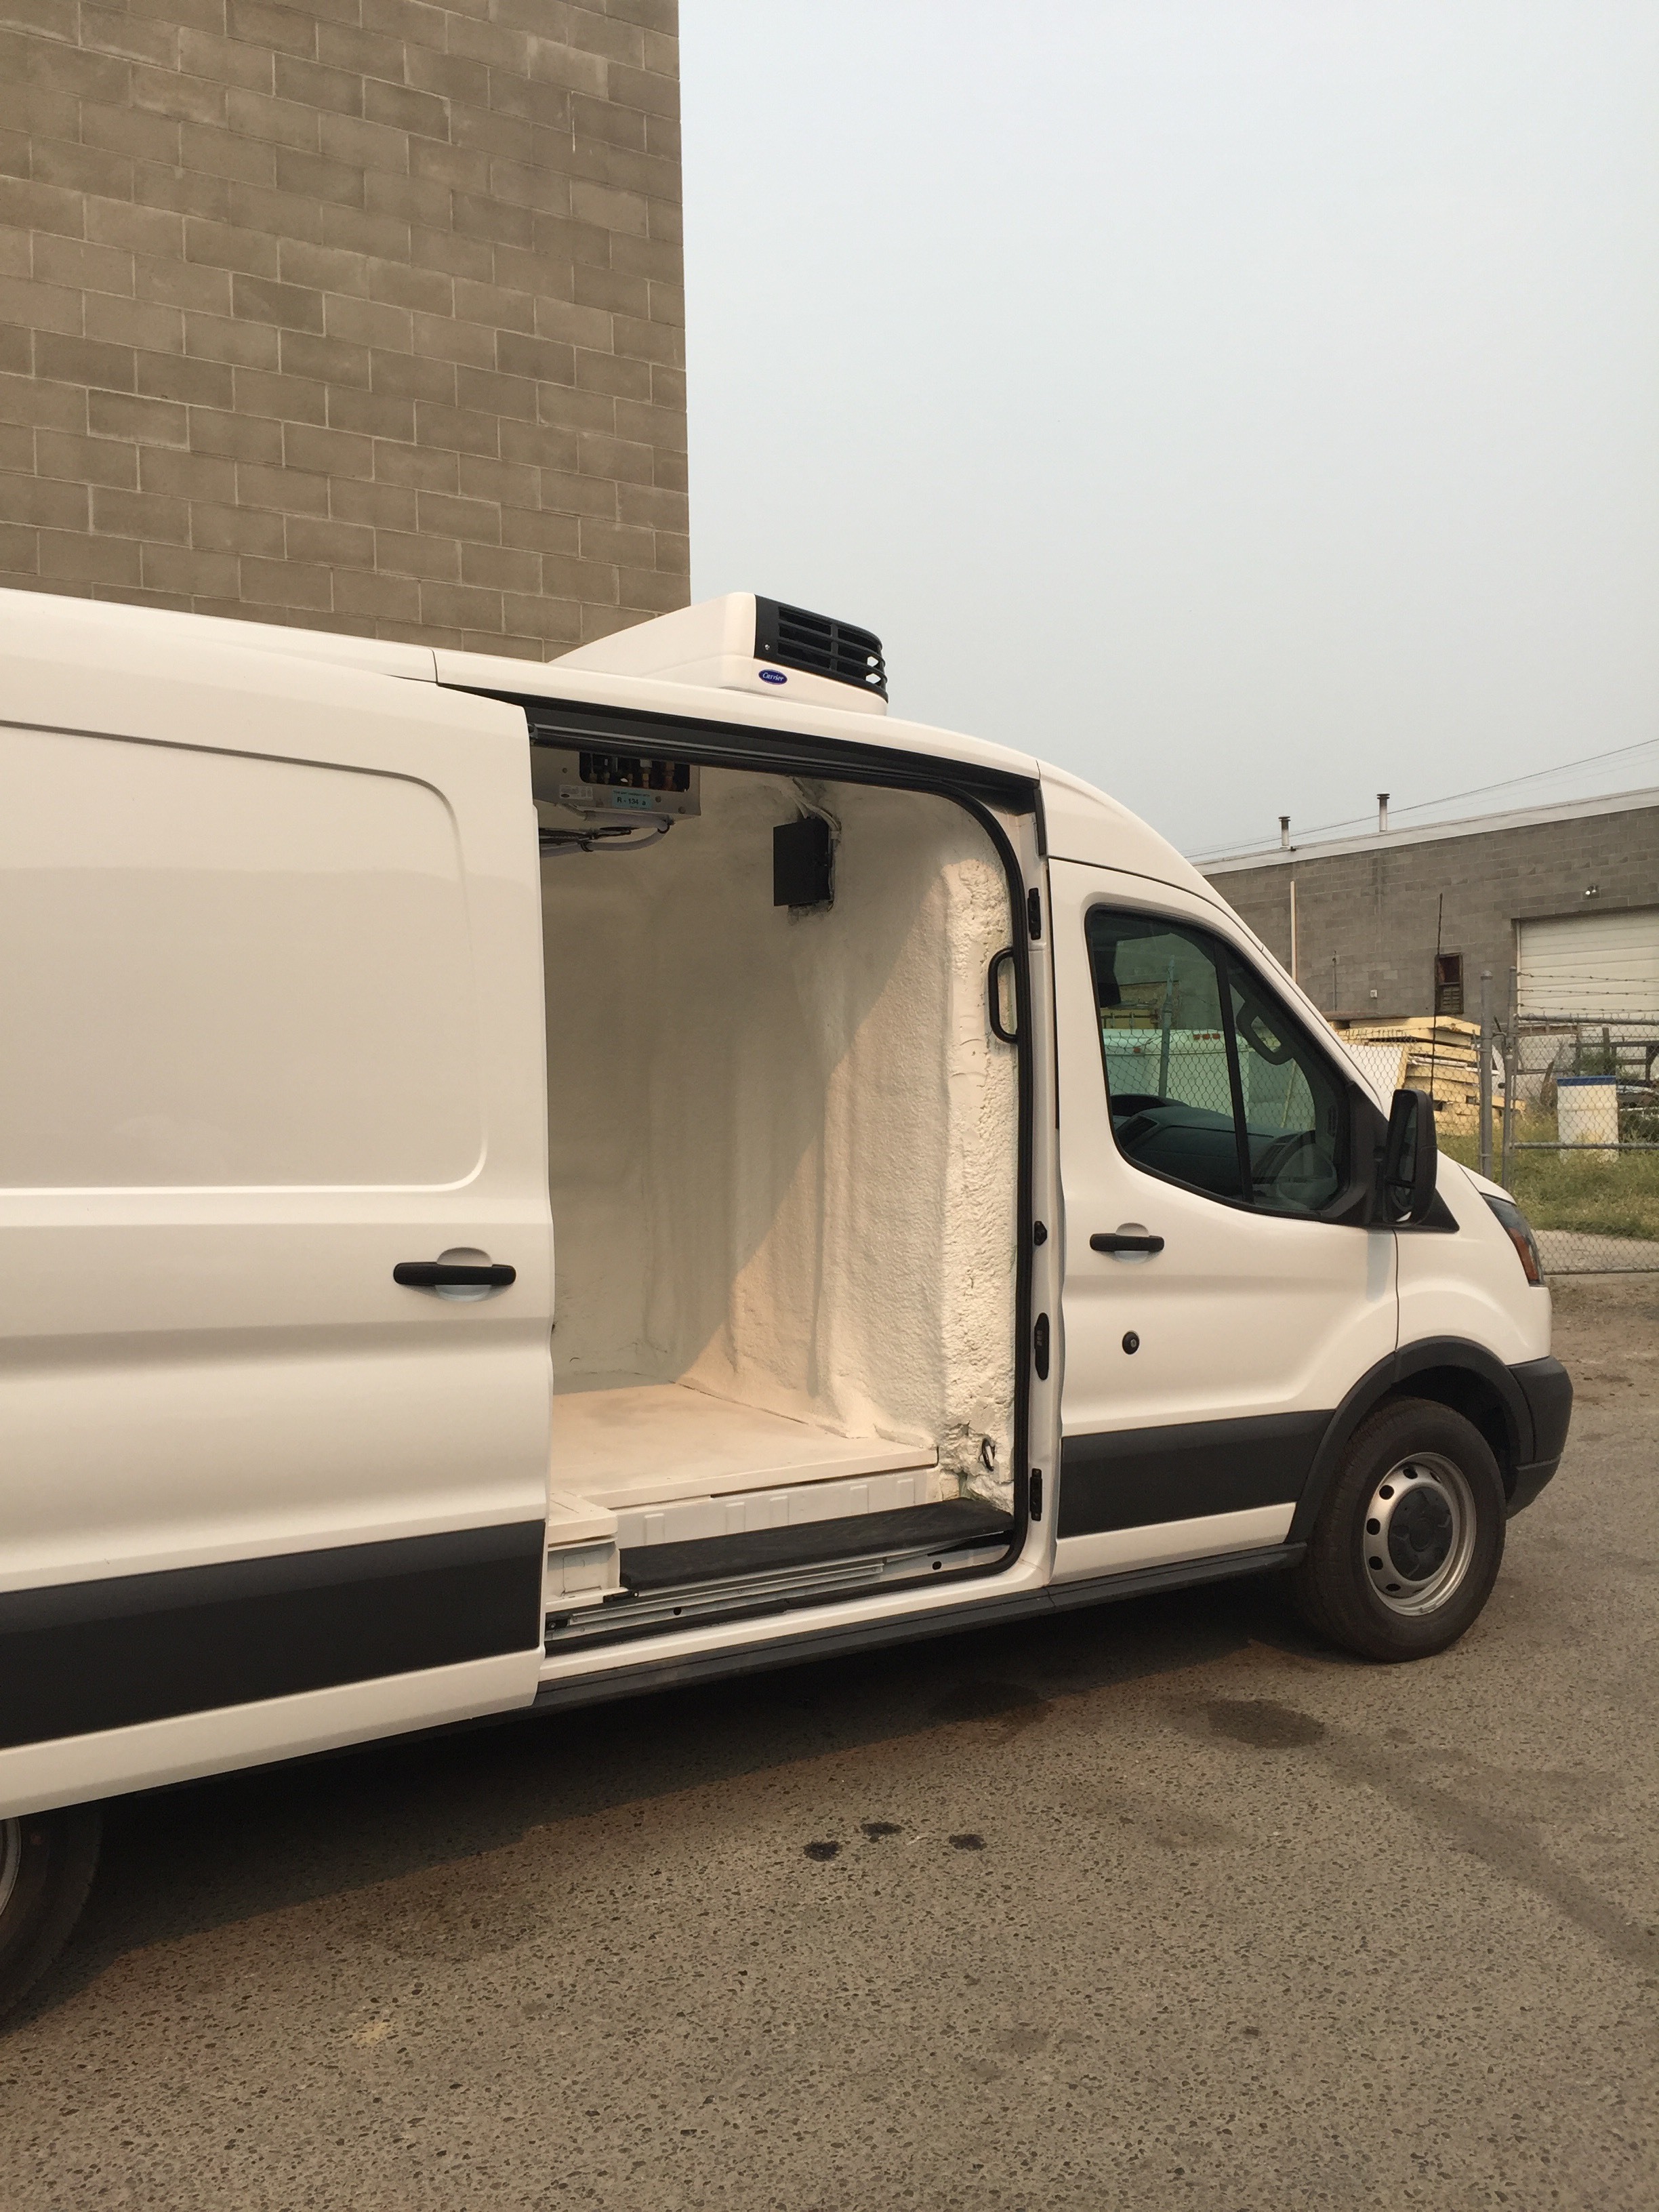 2017 Ford Transit Van Carrier reefer install and insulate.